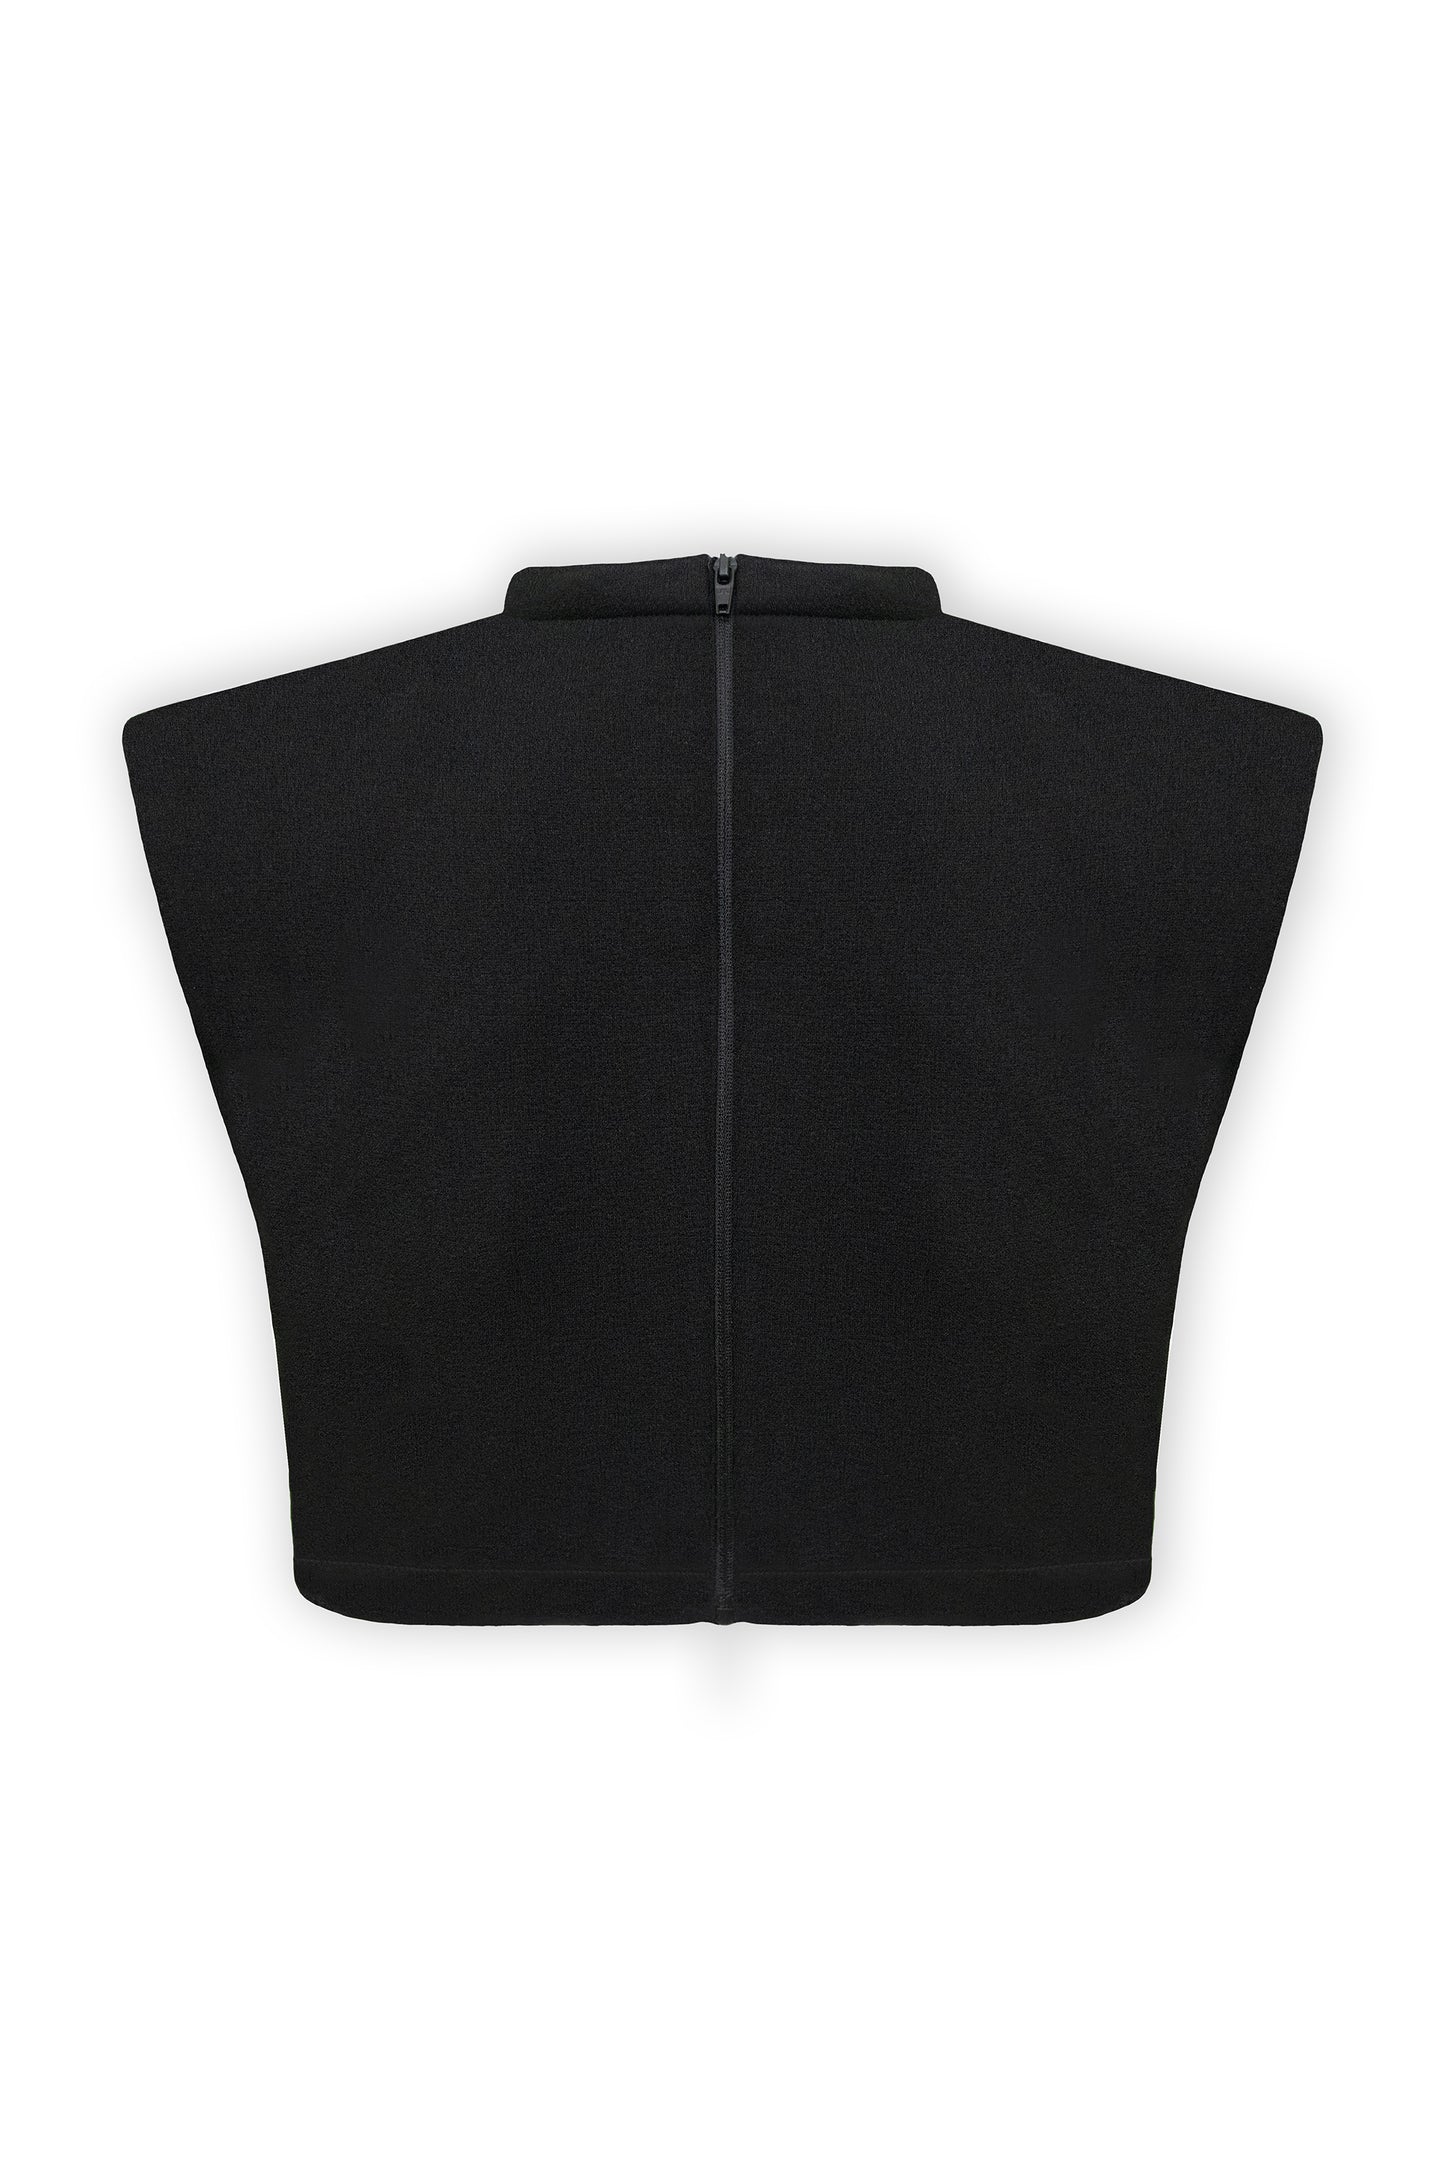 Black padded crop top with a neck rope and embroidery. The embroidery's position is in the upper frontal centre of the padded crop top with an original design. The padded crop top photograph is from the back on a white background.